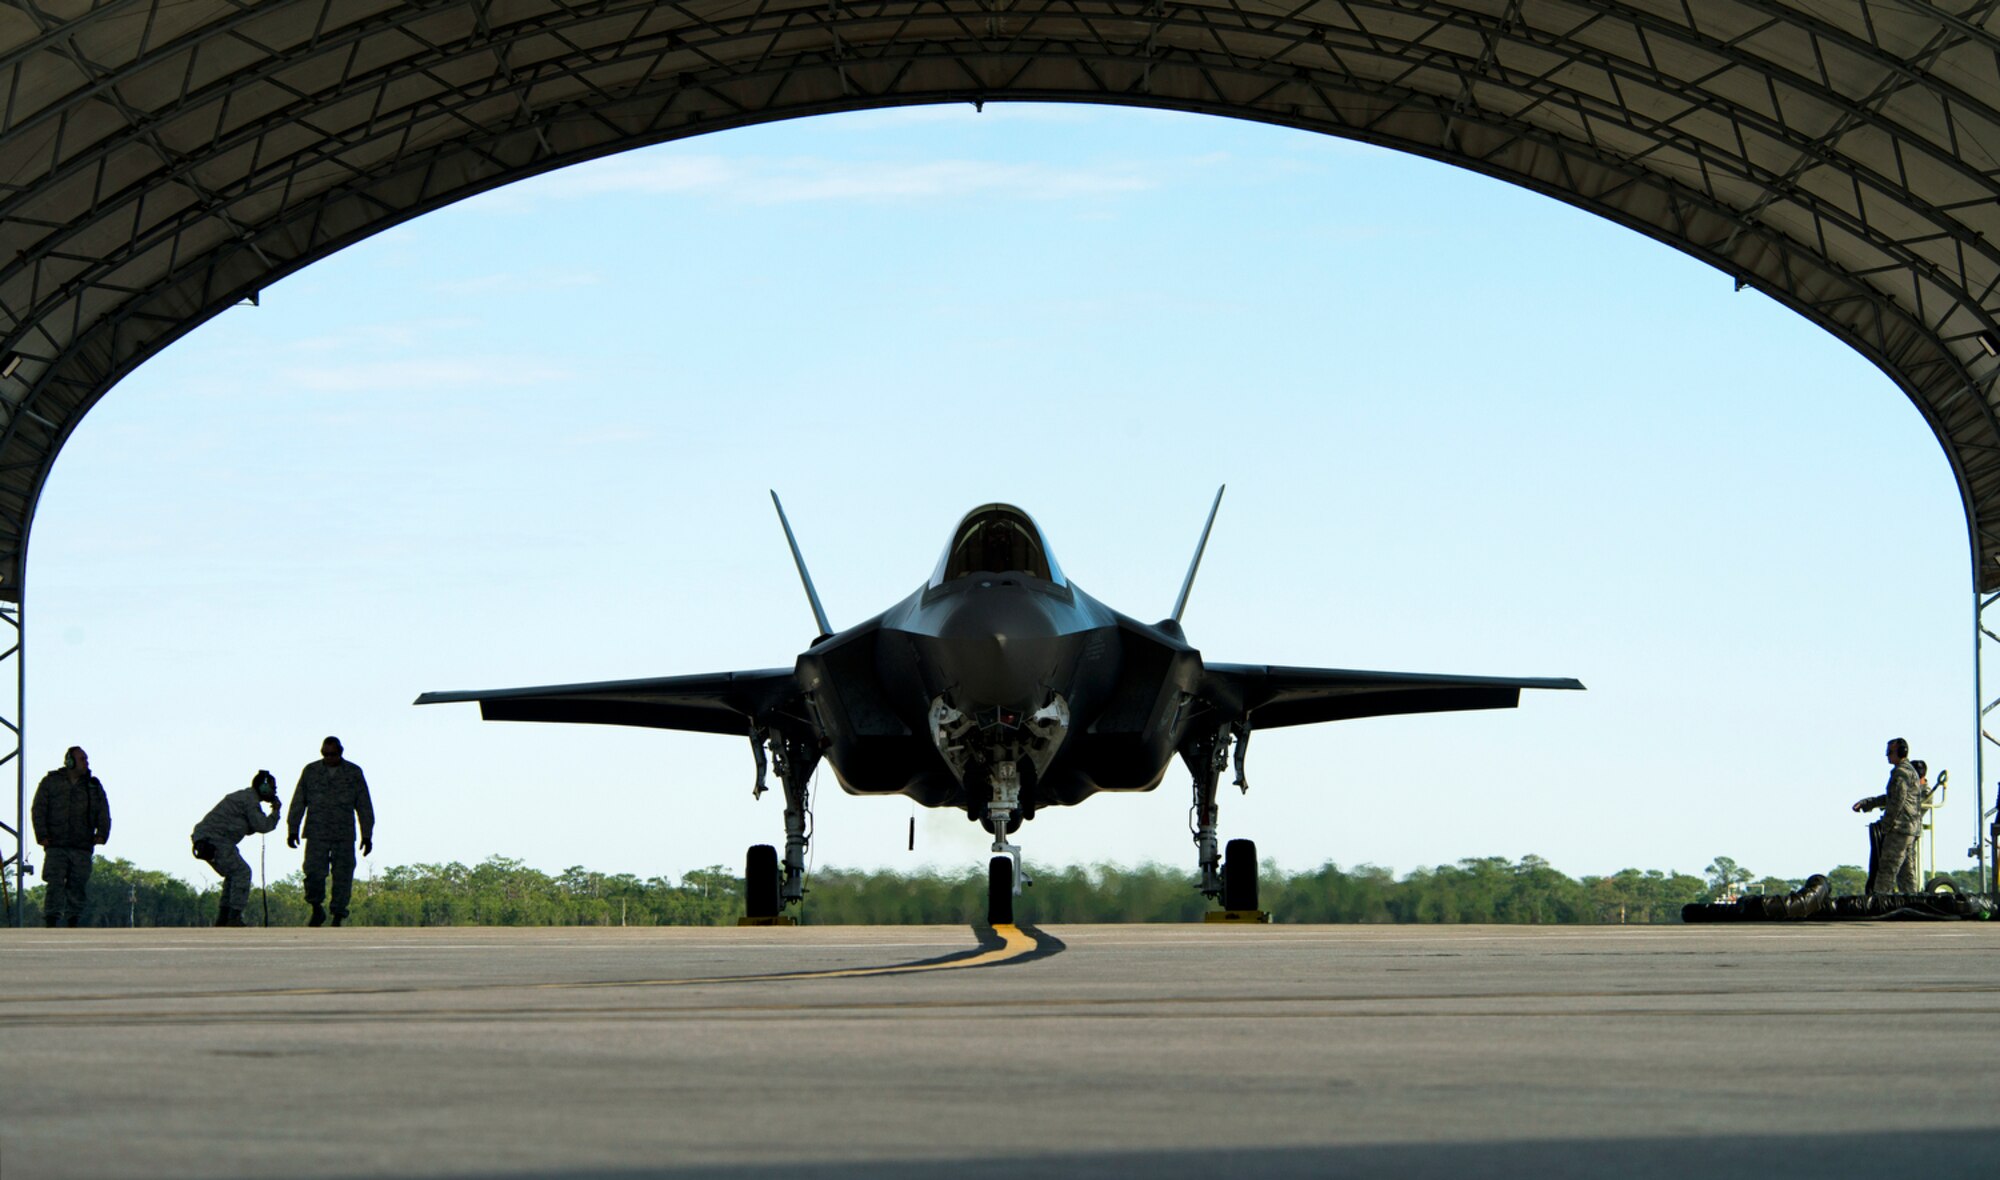 F-35A Lightning II joint strike fighter maintainers from the 58th Aircraft Maintenance Unit at Eglin Air Force Base, Fla., preflight the jet before taking off for a local training mission over the Emerald Coast. (U.S. Air Force photo/Tech. Sgt. Bennie J. Davis III)